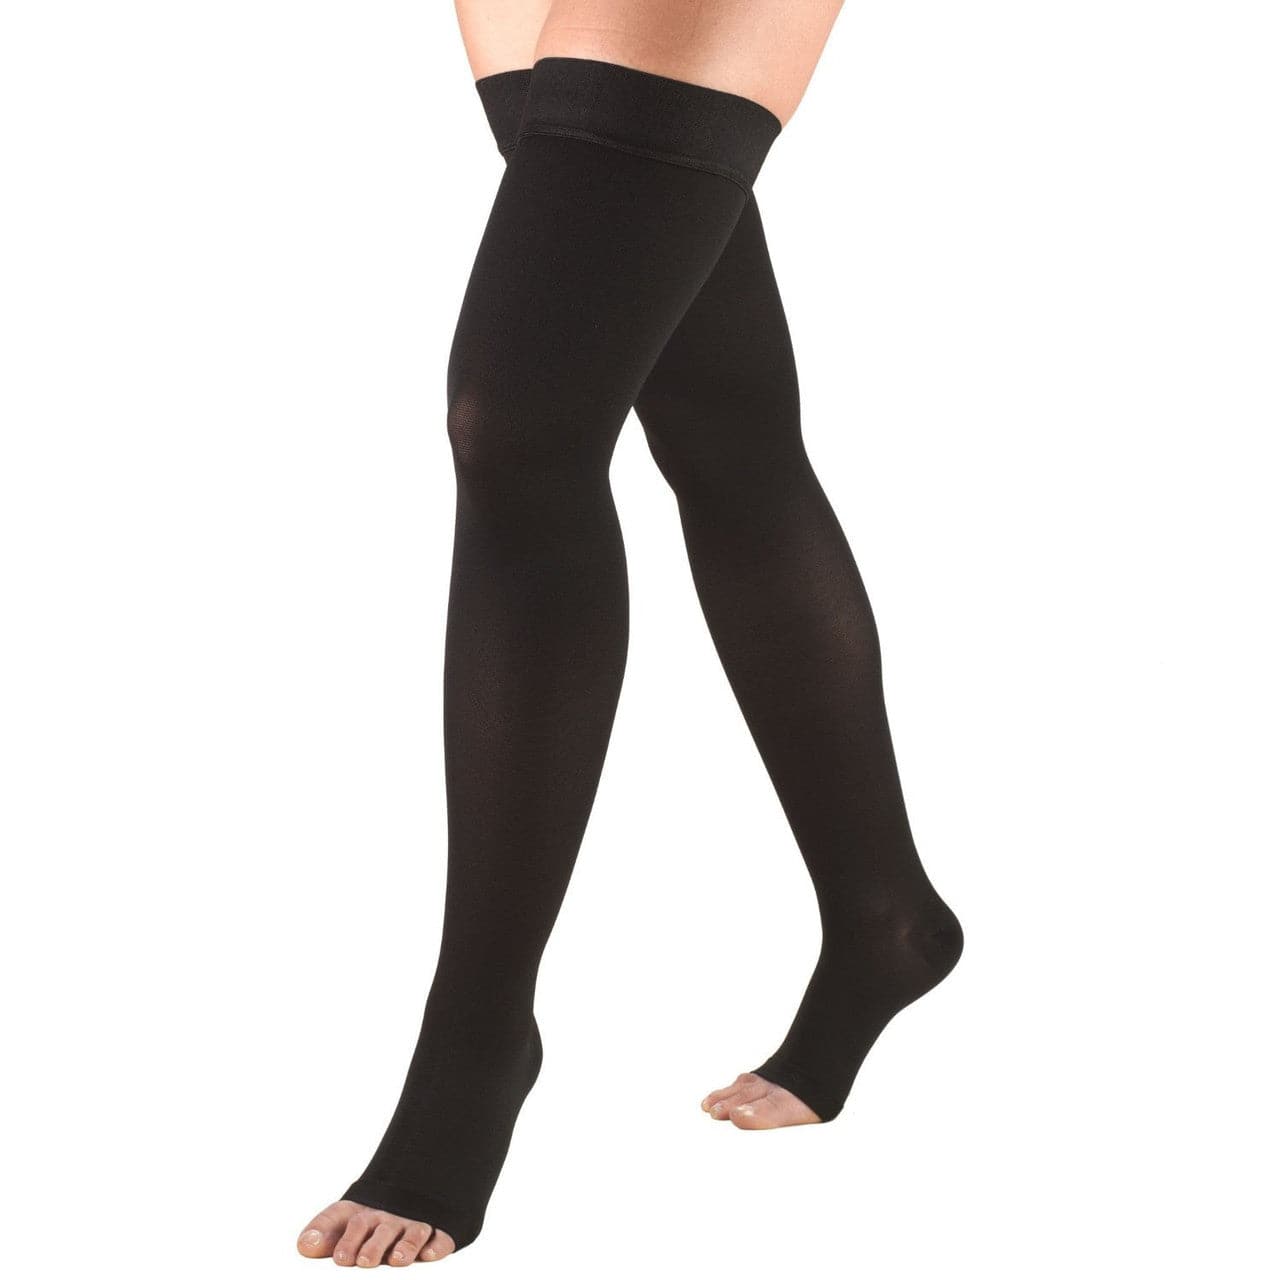 Shiny tights without fingertip reinforcement